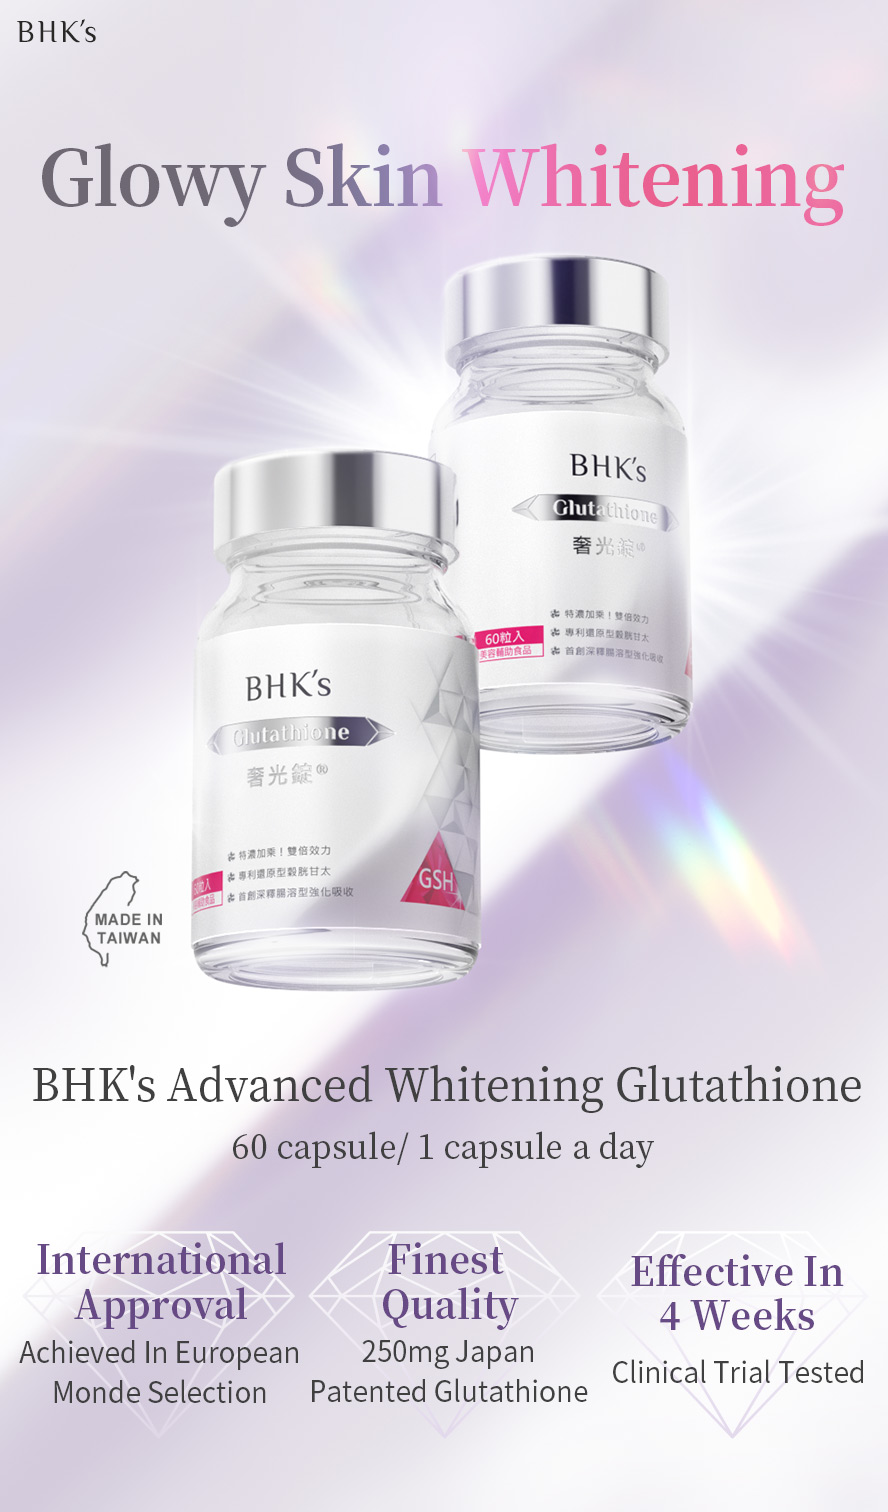 Controlled release technology with advanced formulation of absorption enhancement